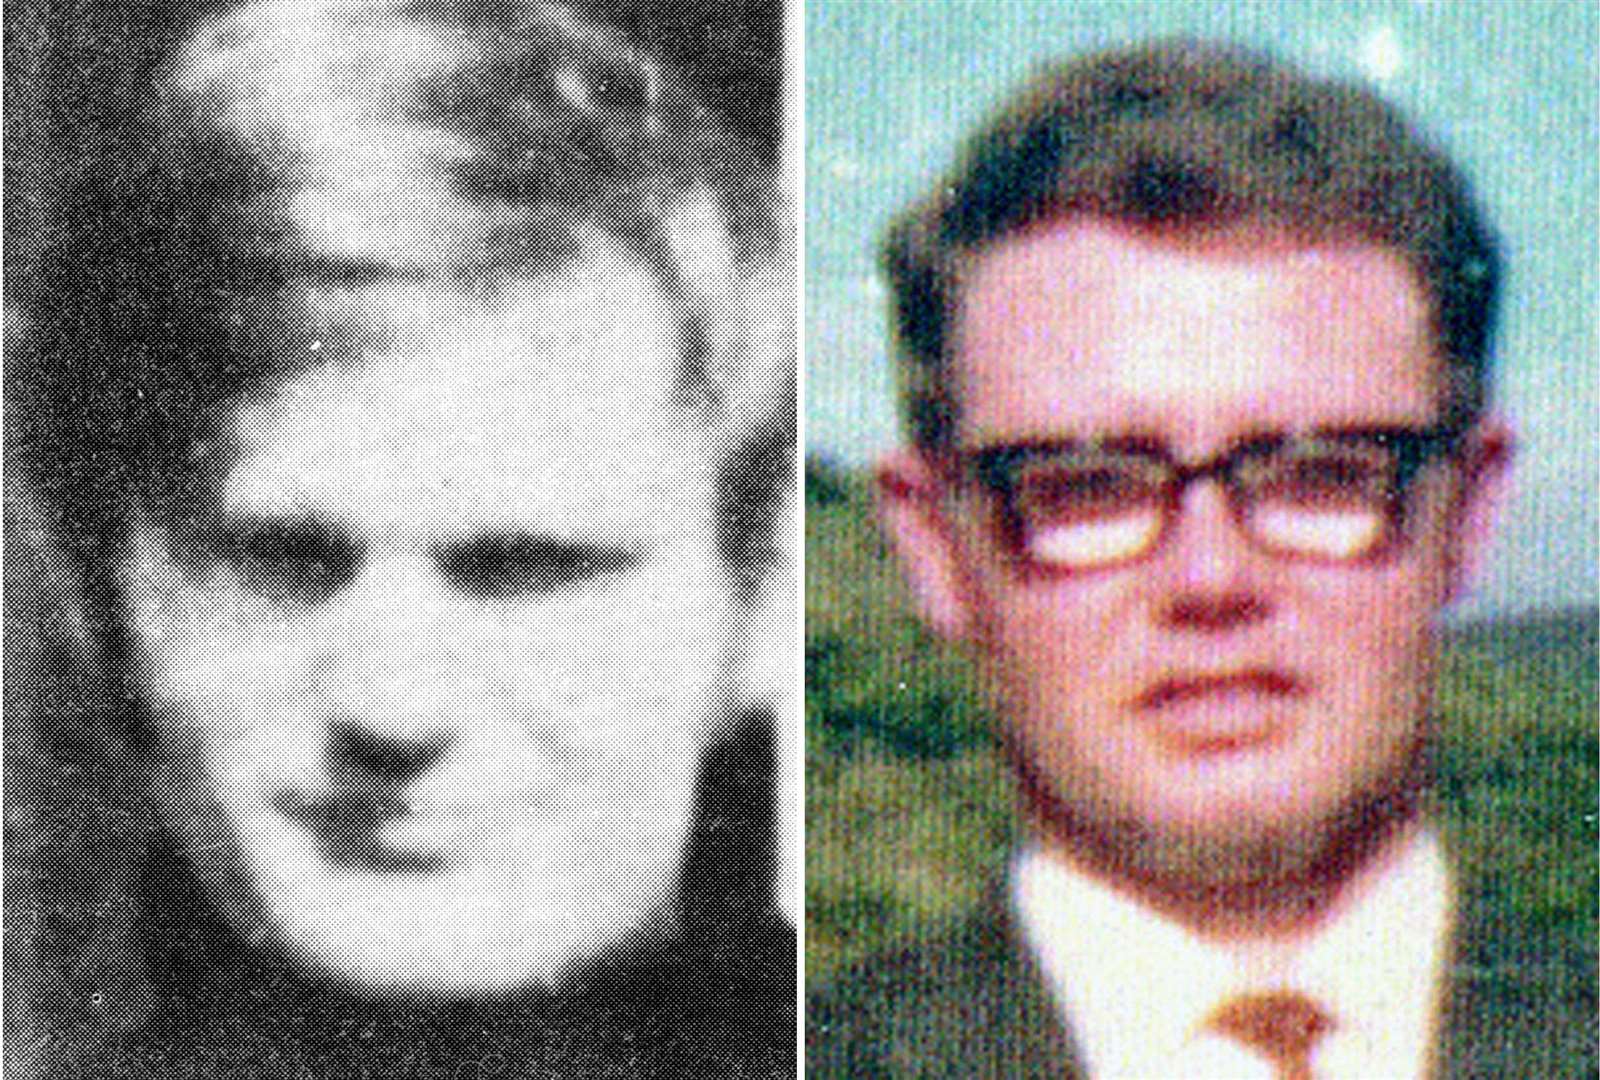 Soldier F is accused of the murders of James Wray (left) and William McKinney who died on Bloody Sunday (Bloody Sunday Trust/PA)